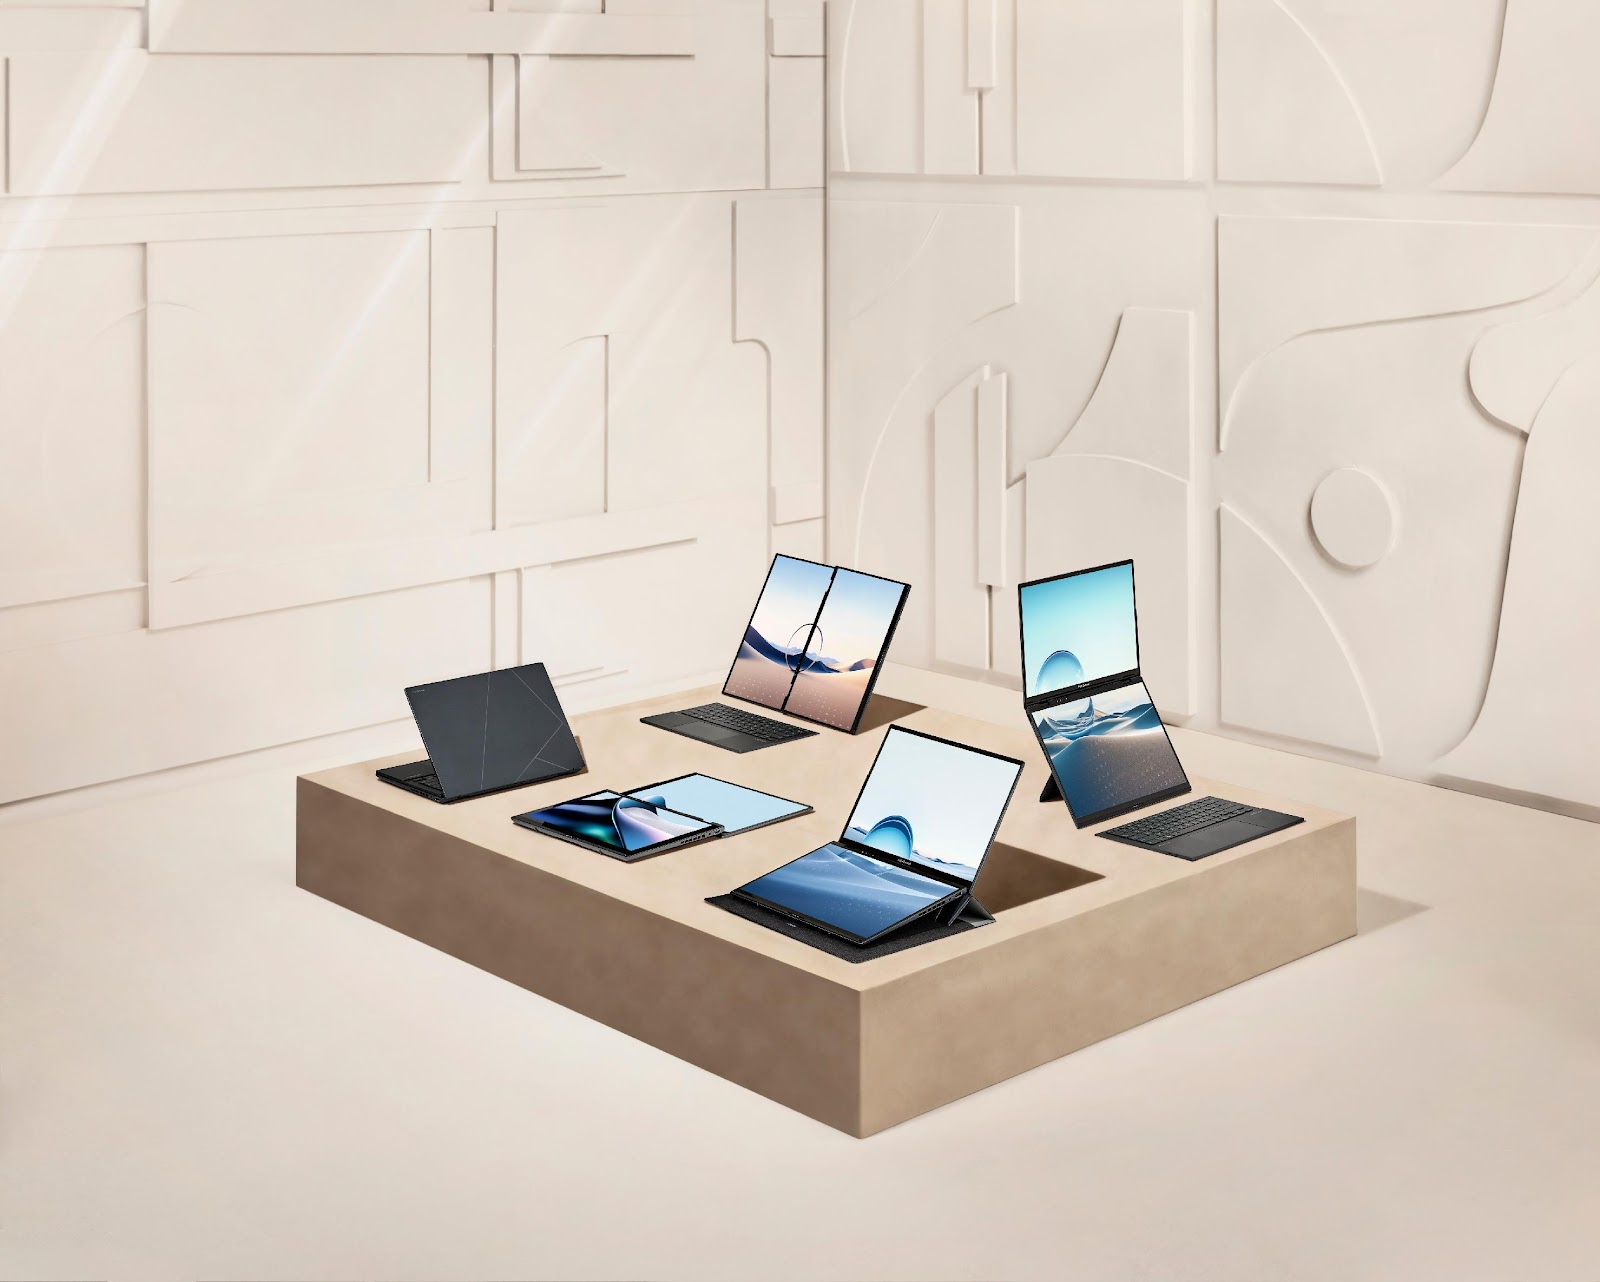 A group of laptops and tablets on a square tableDescription automatically generated